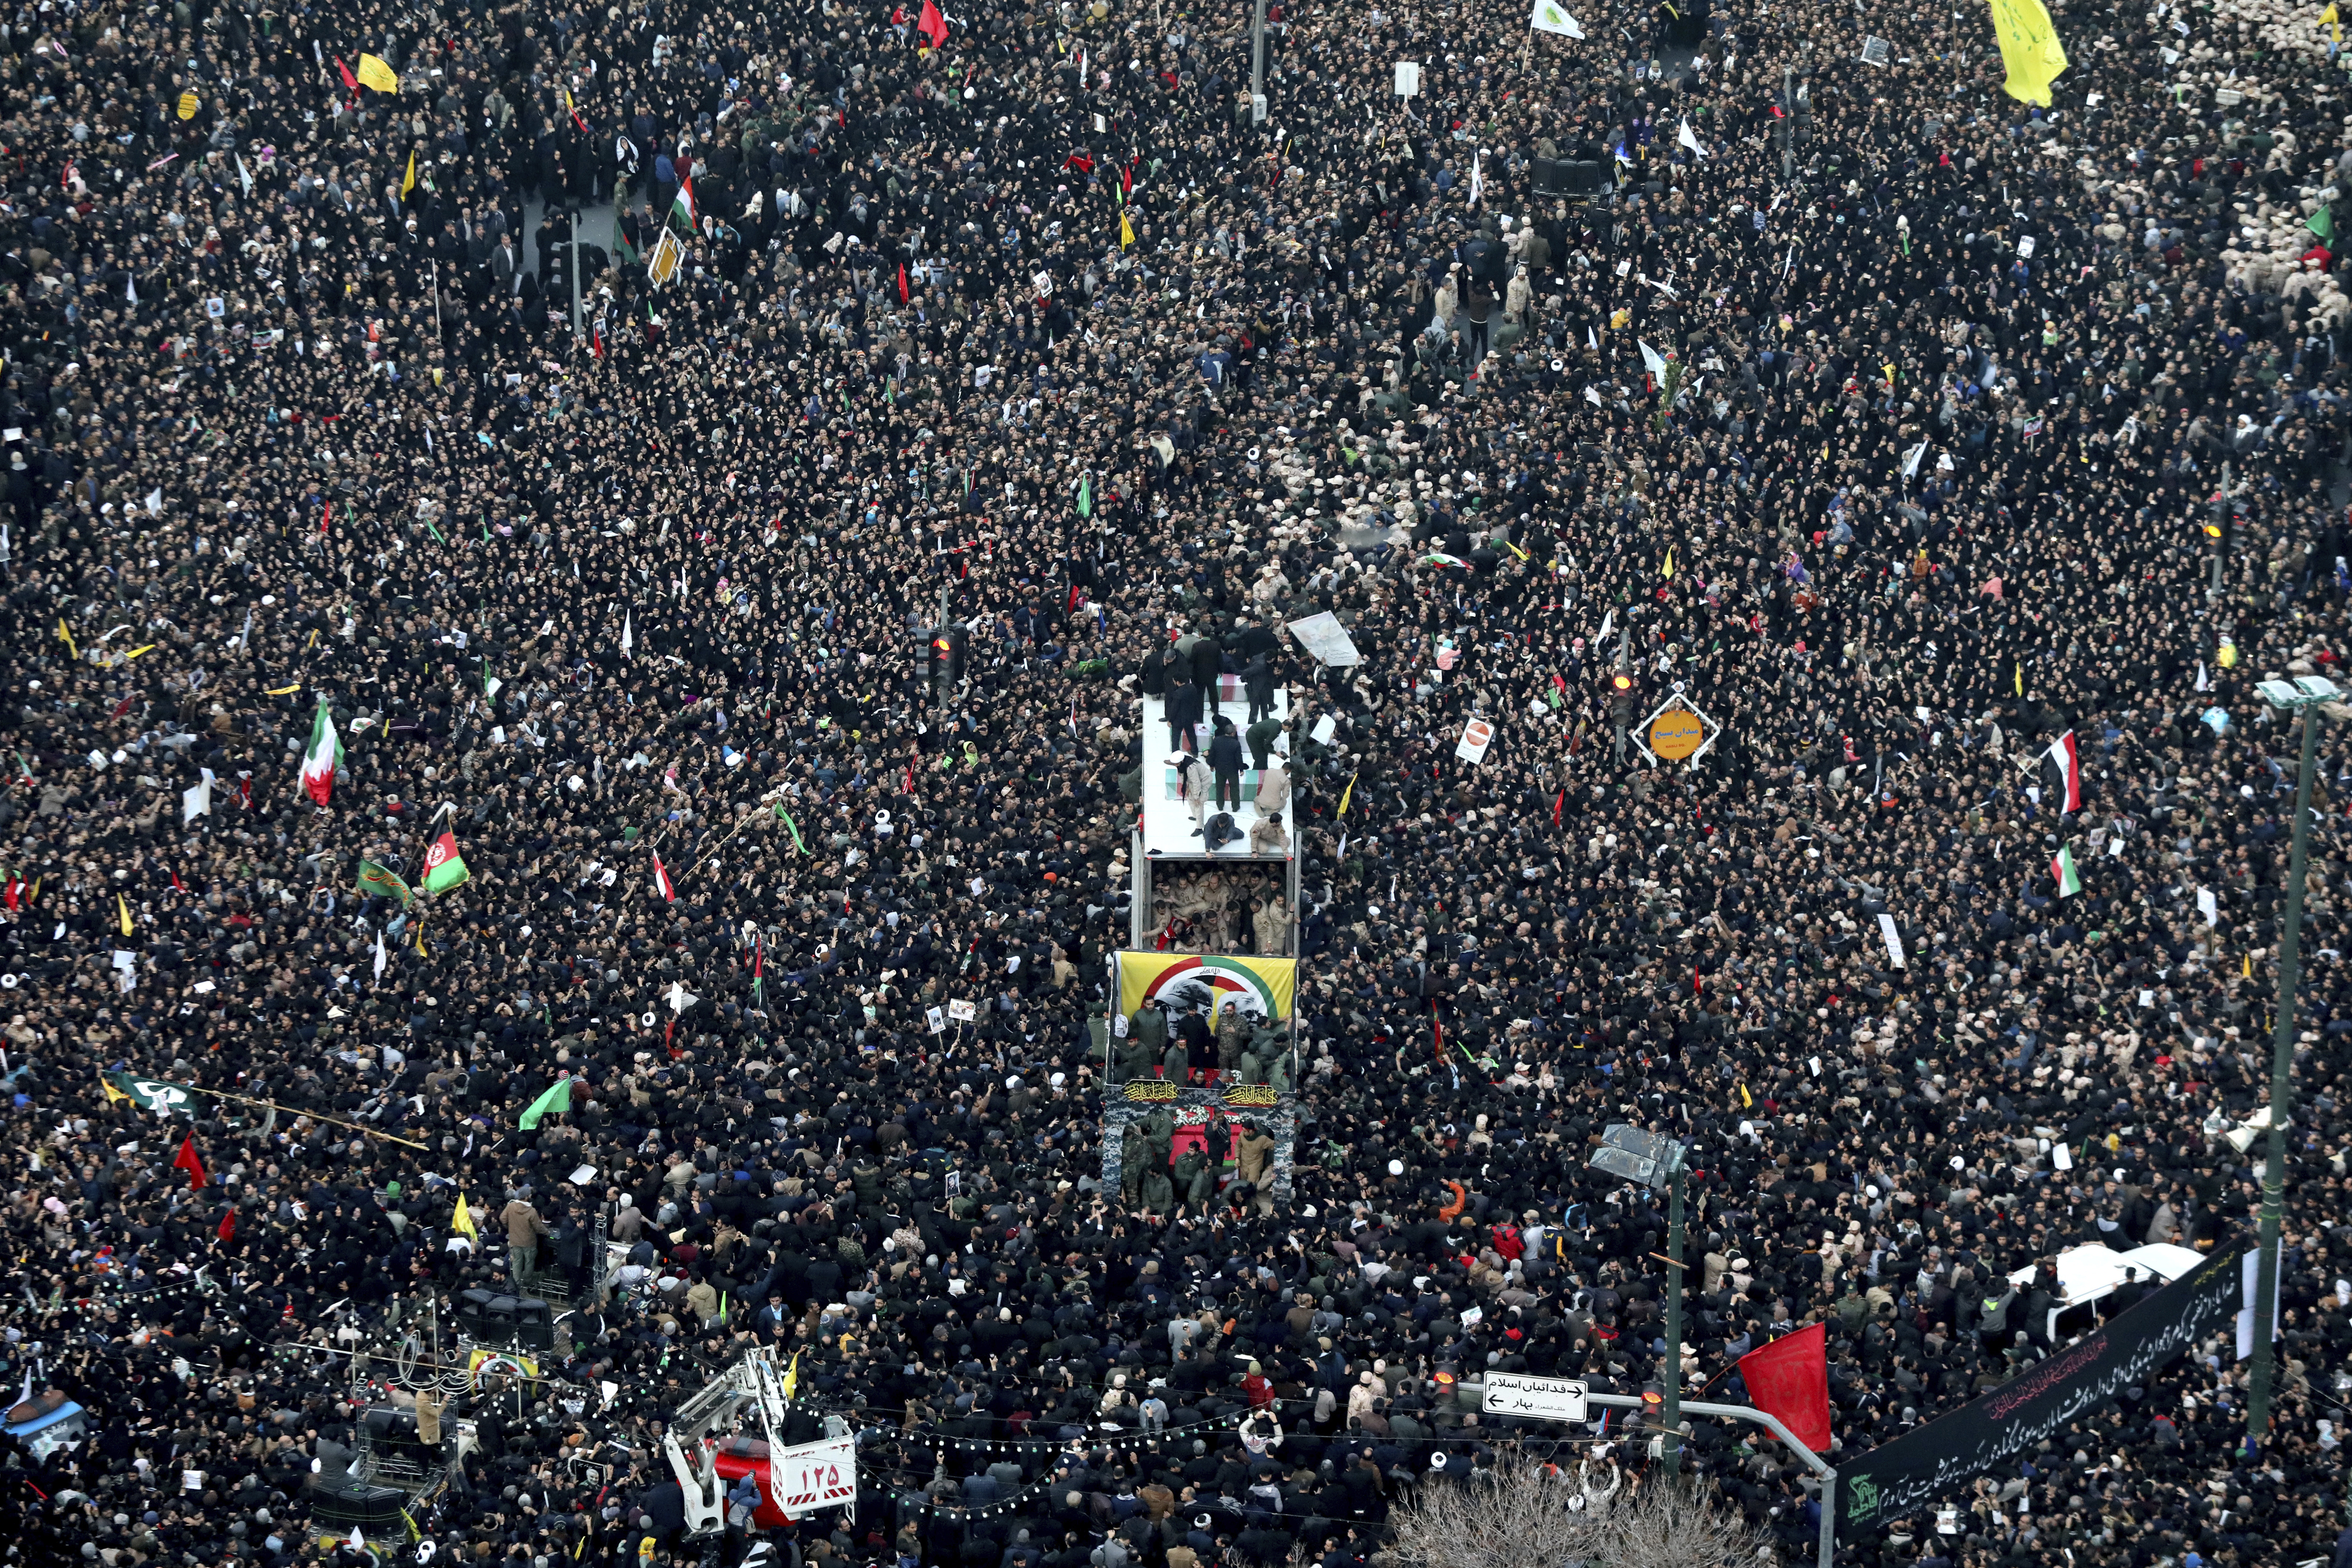 Coffins of Gen. Qassem Soleimani and others who were killed in Iraq by a US drone strike, are carried on a truck surrounded by mourners during a funeral procession, in the city of Mashhad, Iran, Sunday, January 5, 2020